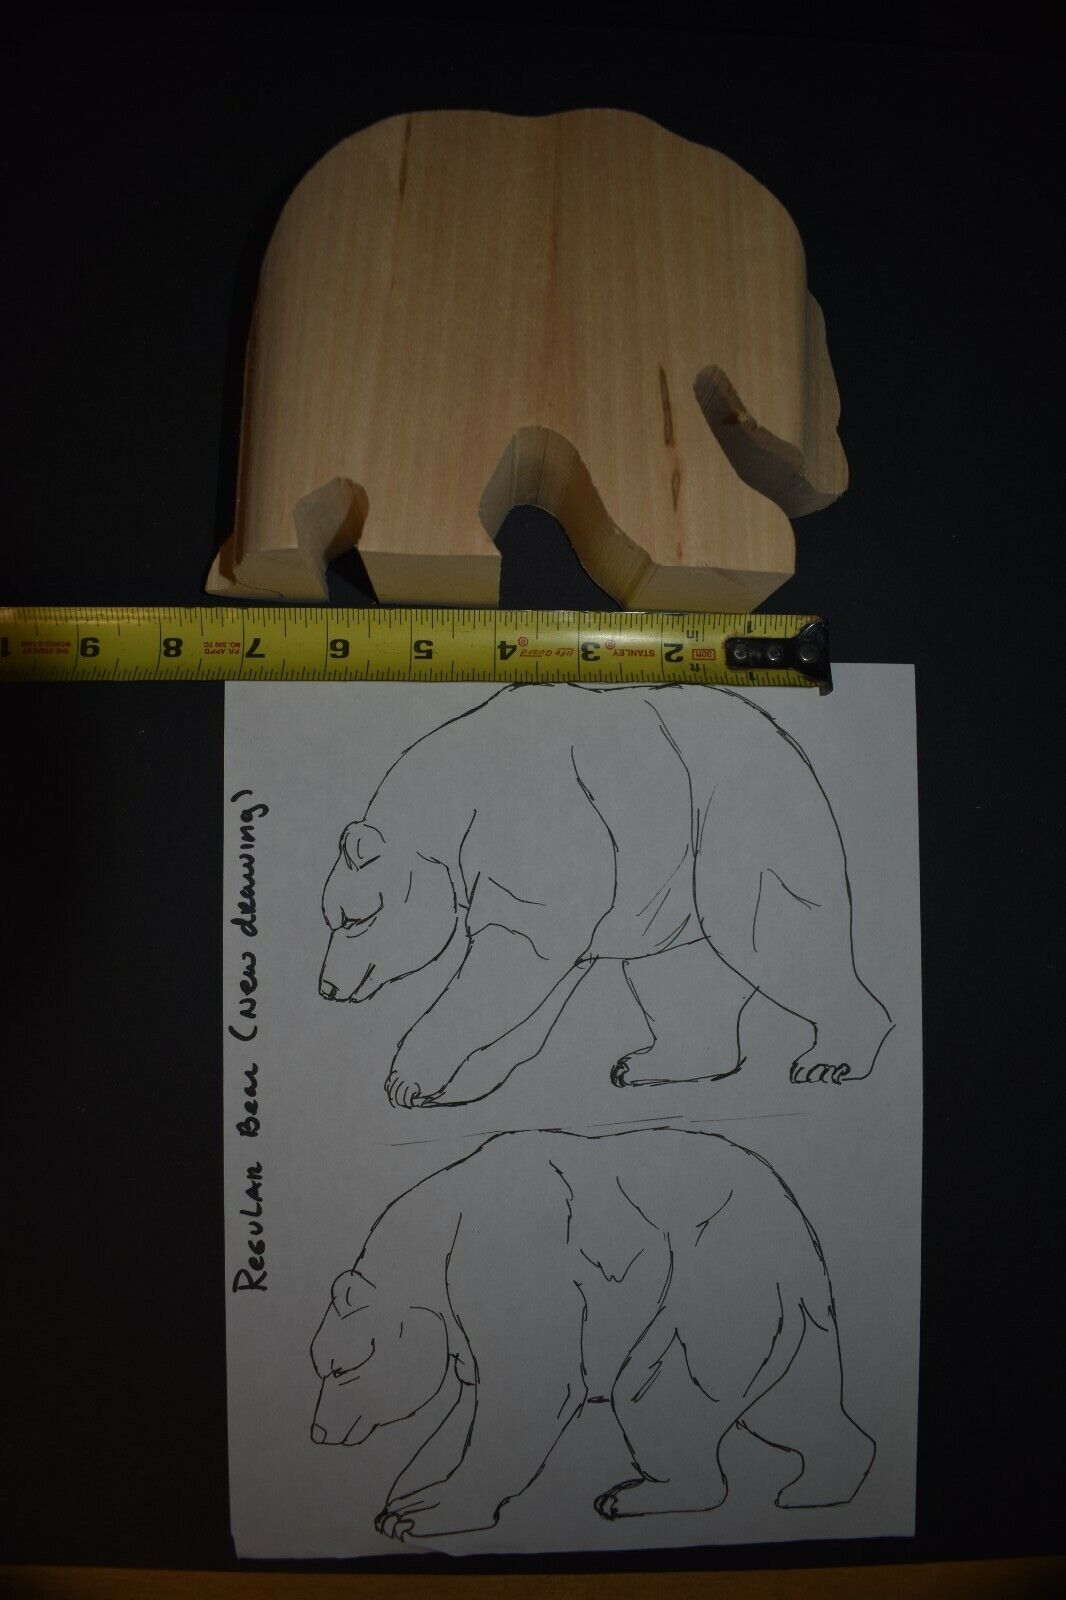 40% Very popular OFF Cheap Sale Bear woodcarving blanks patterns kits carving